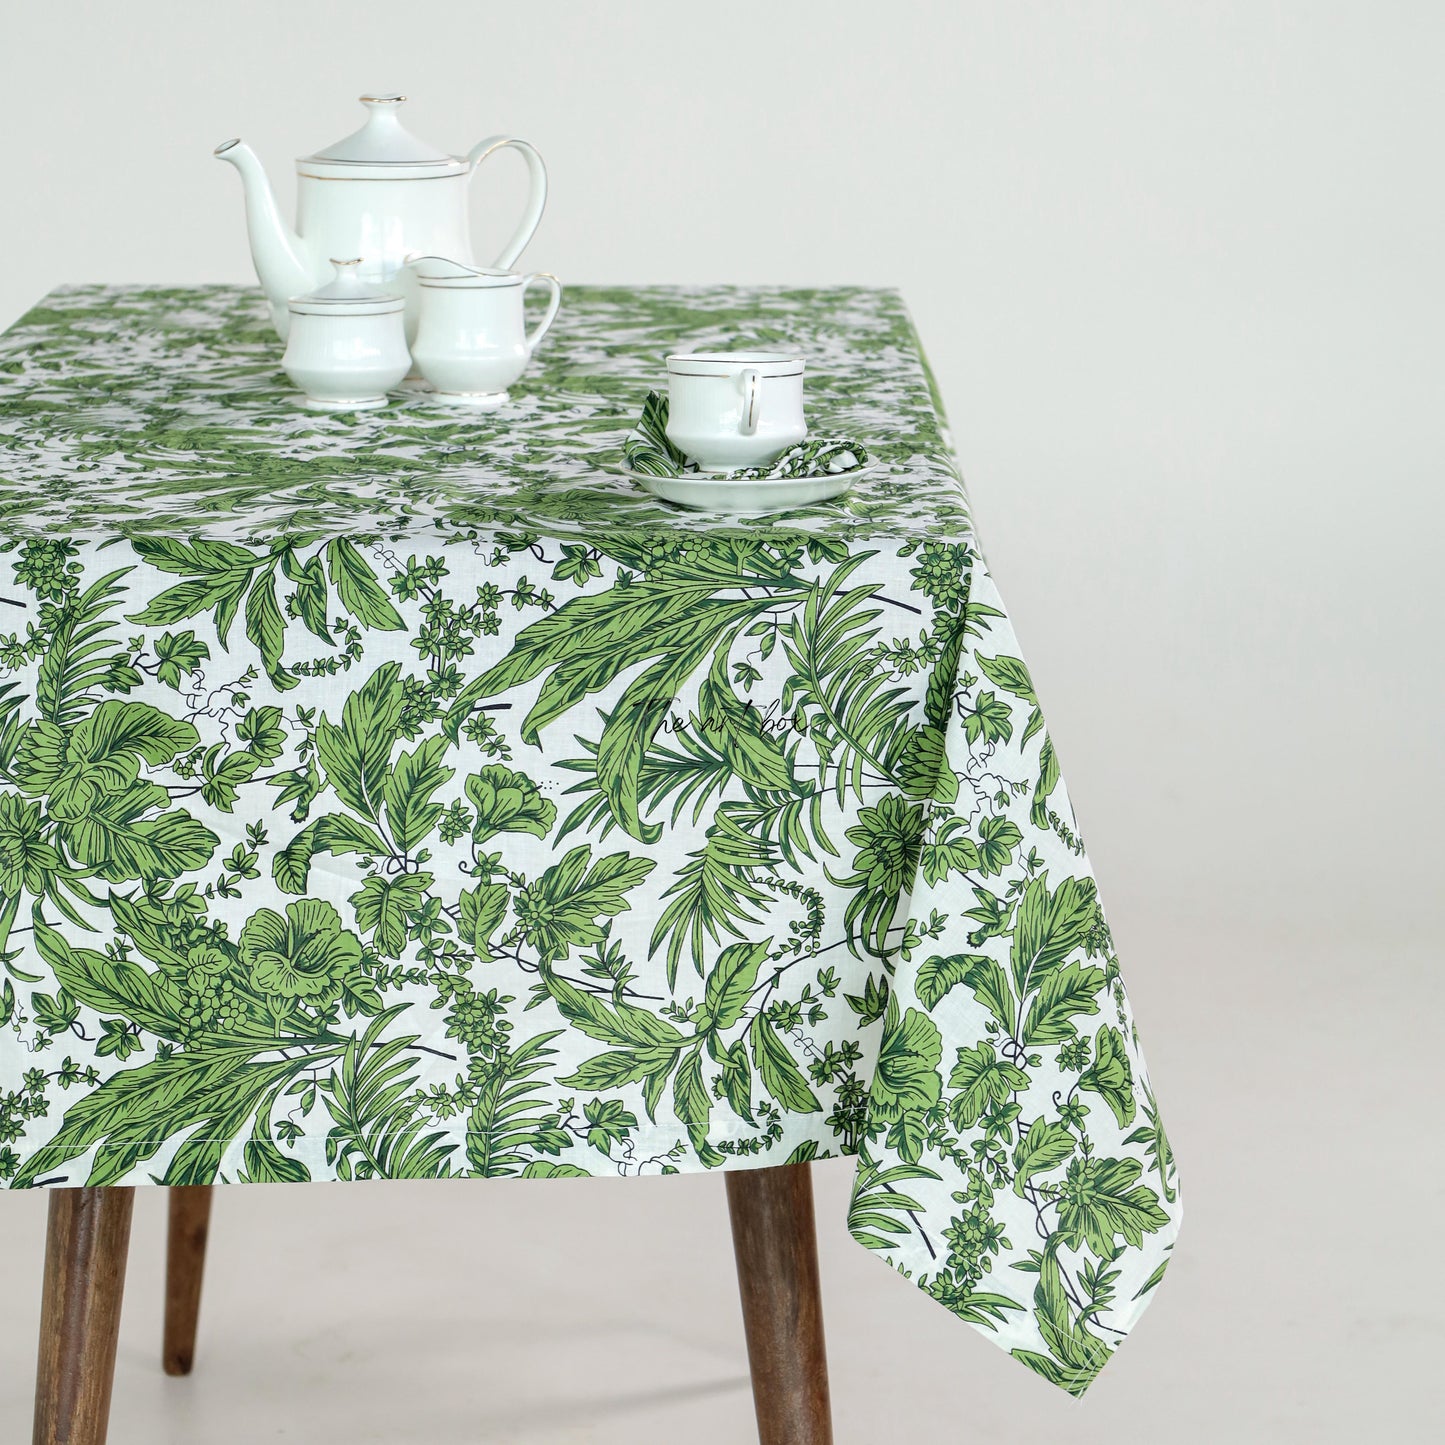 Serenity Blooms Printed Table cover in Soft Floral Cotton